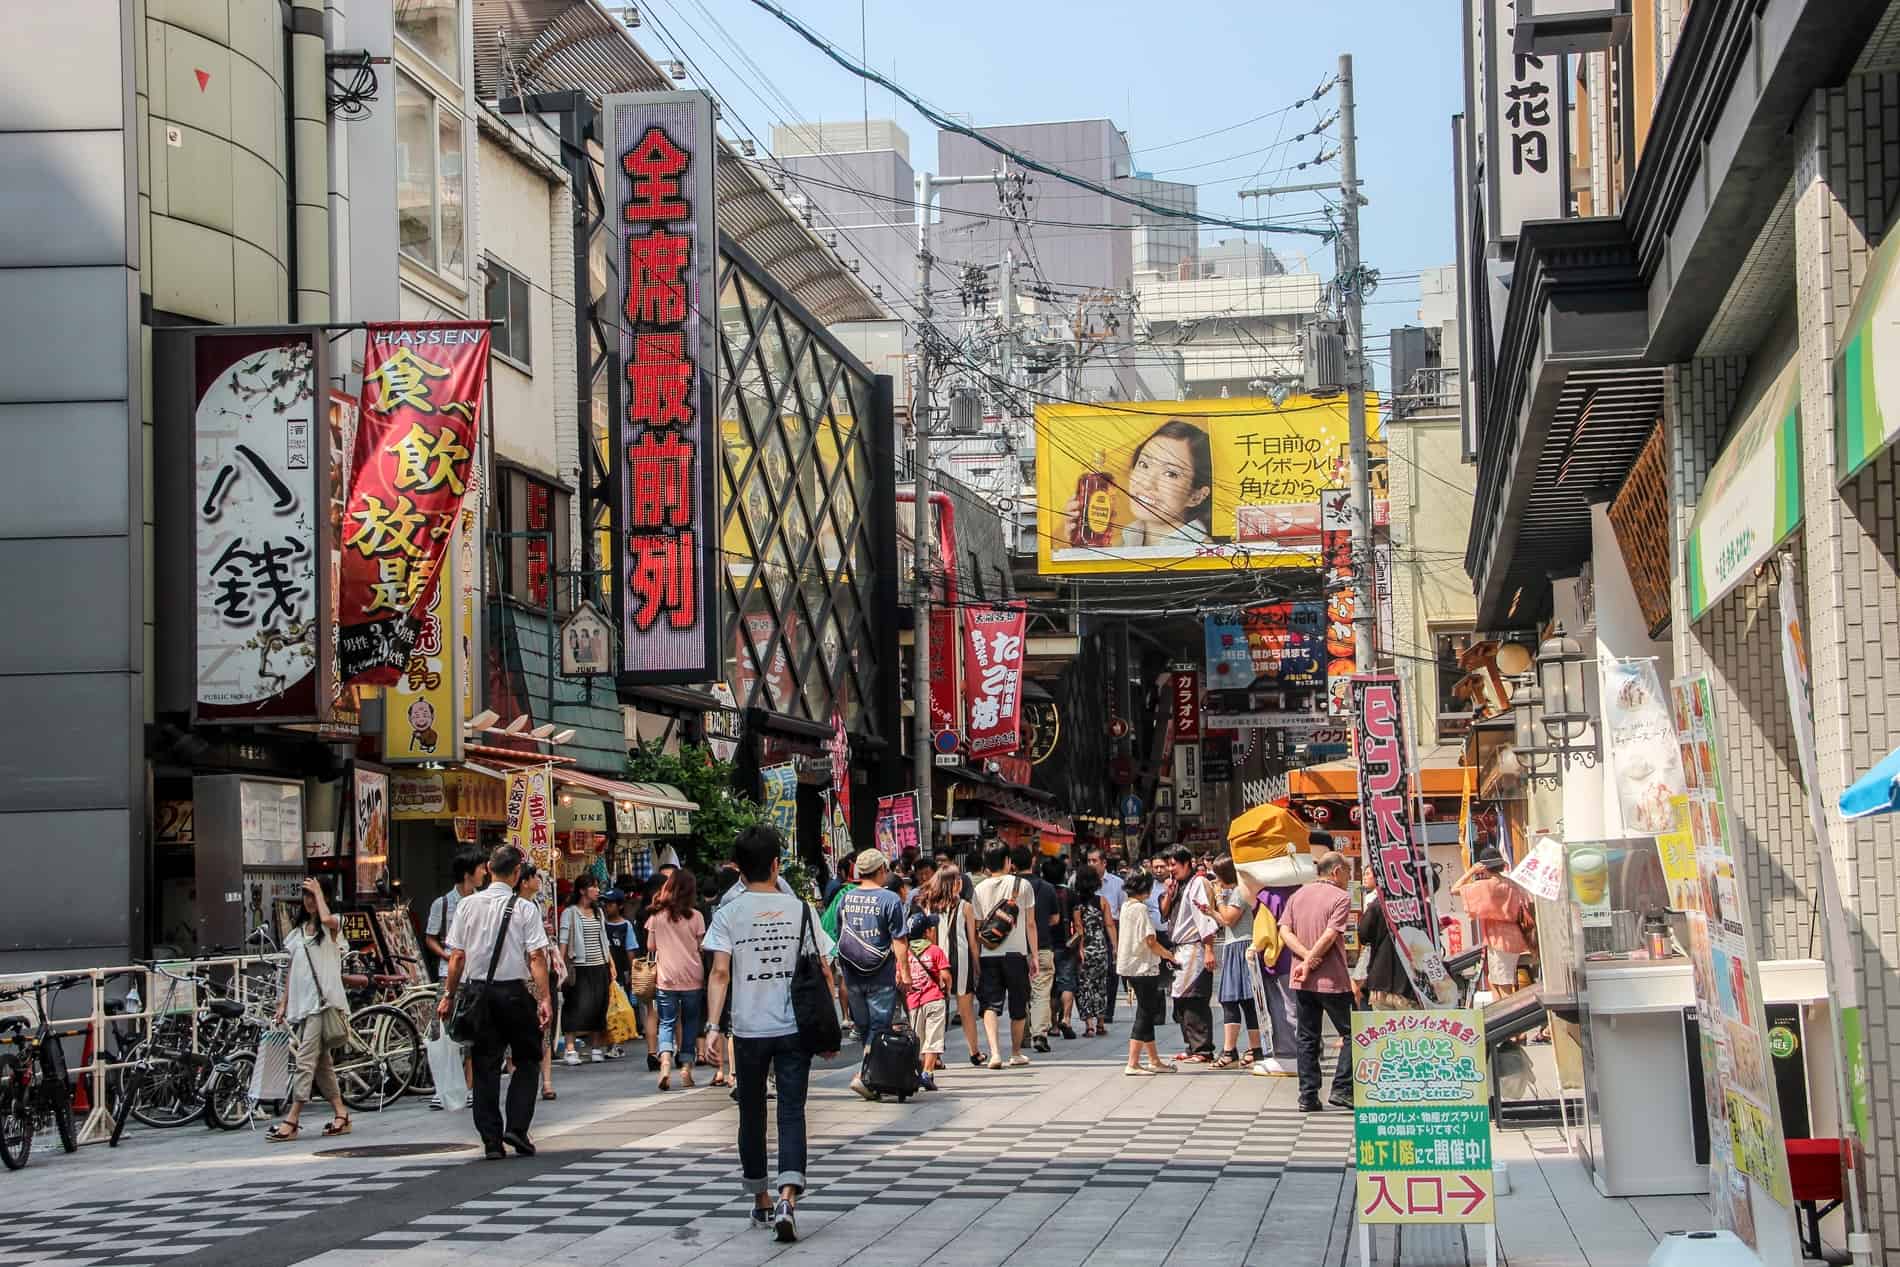 A crowded street in Osaka lined with stores and advertising signs, leading into a long shopping arcade. 